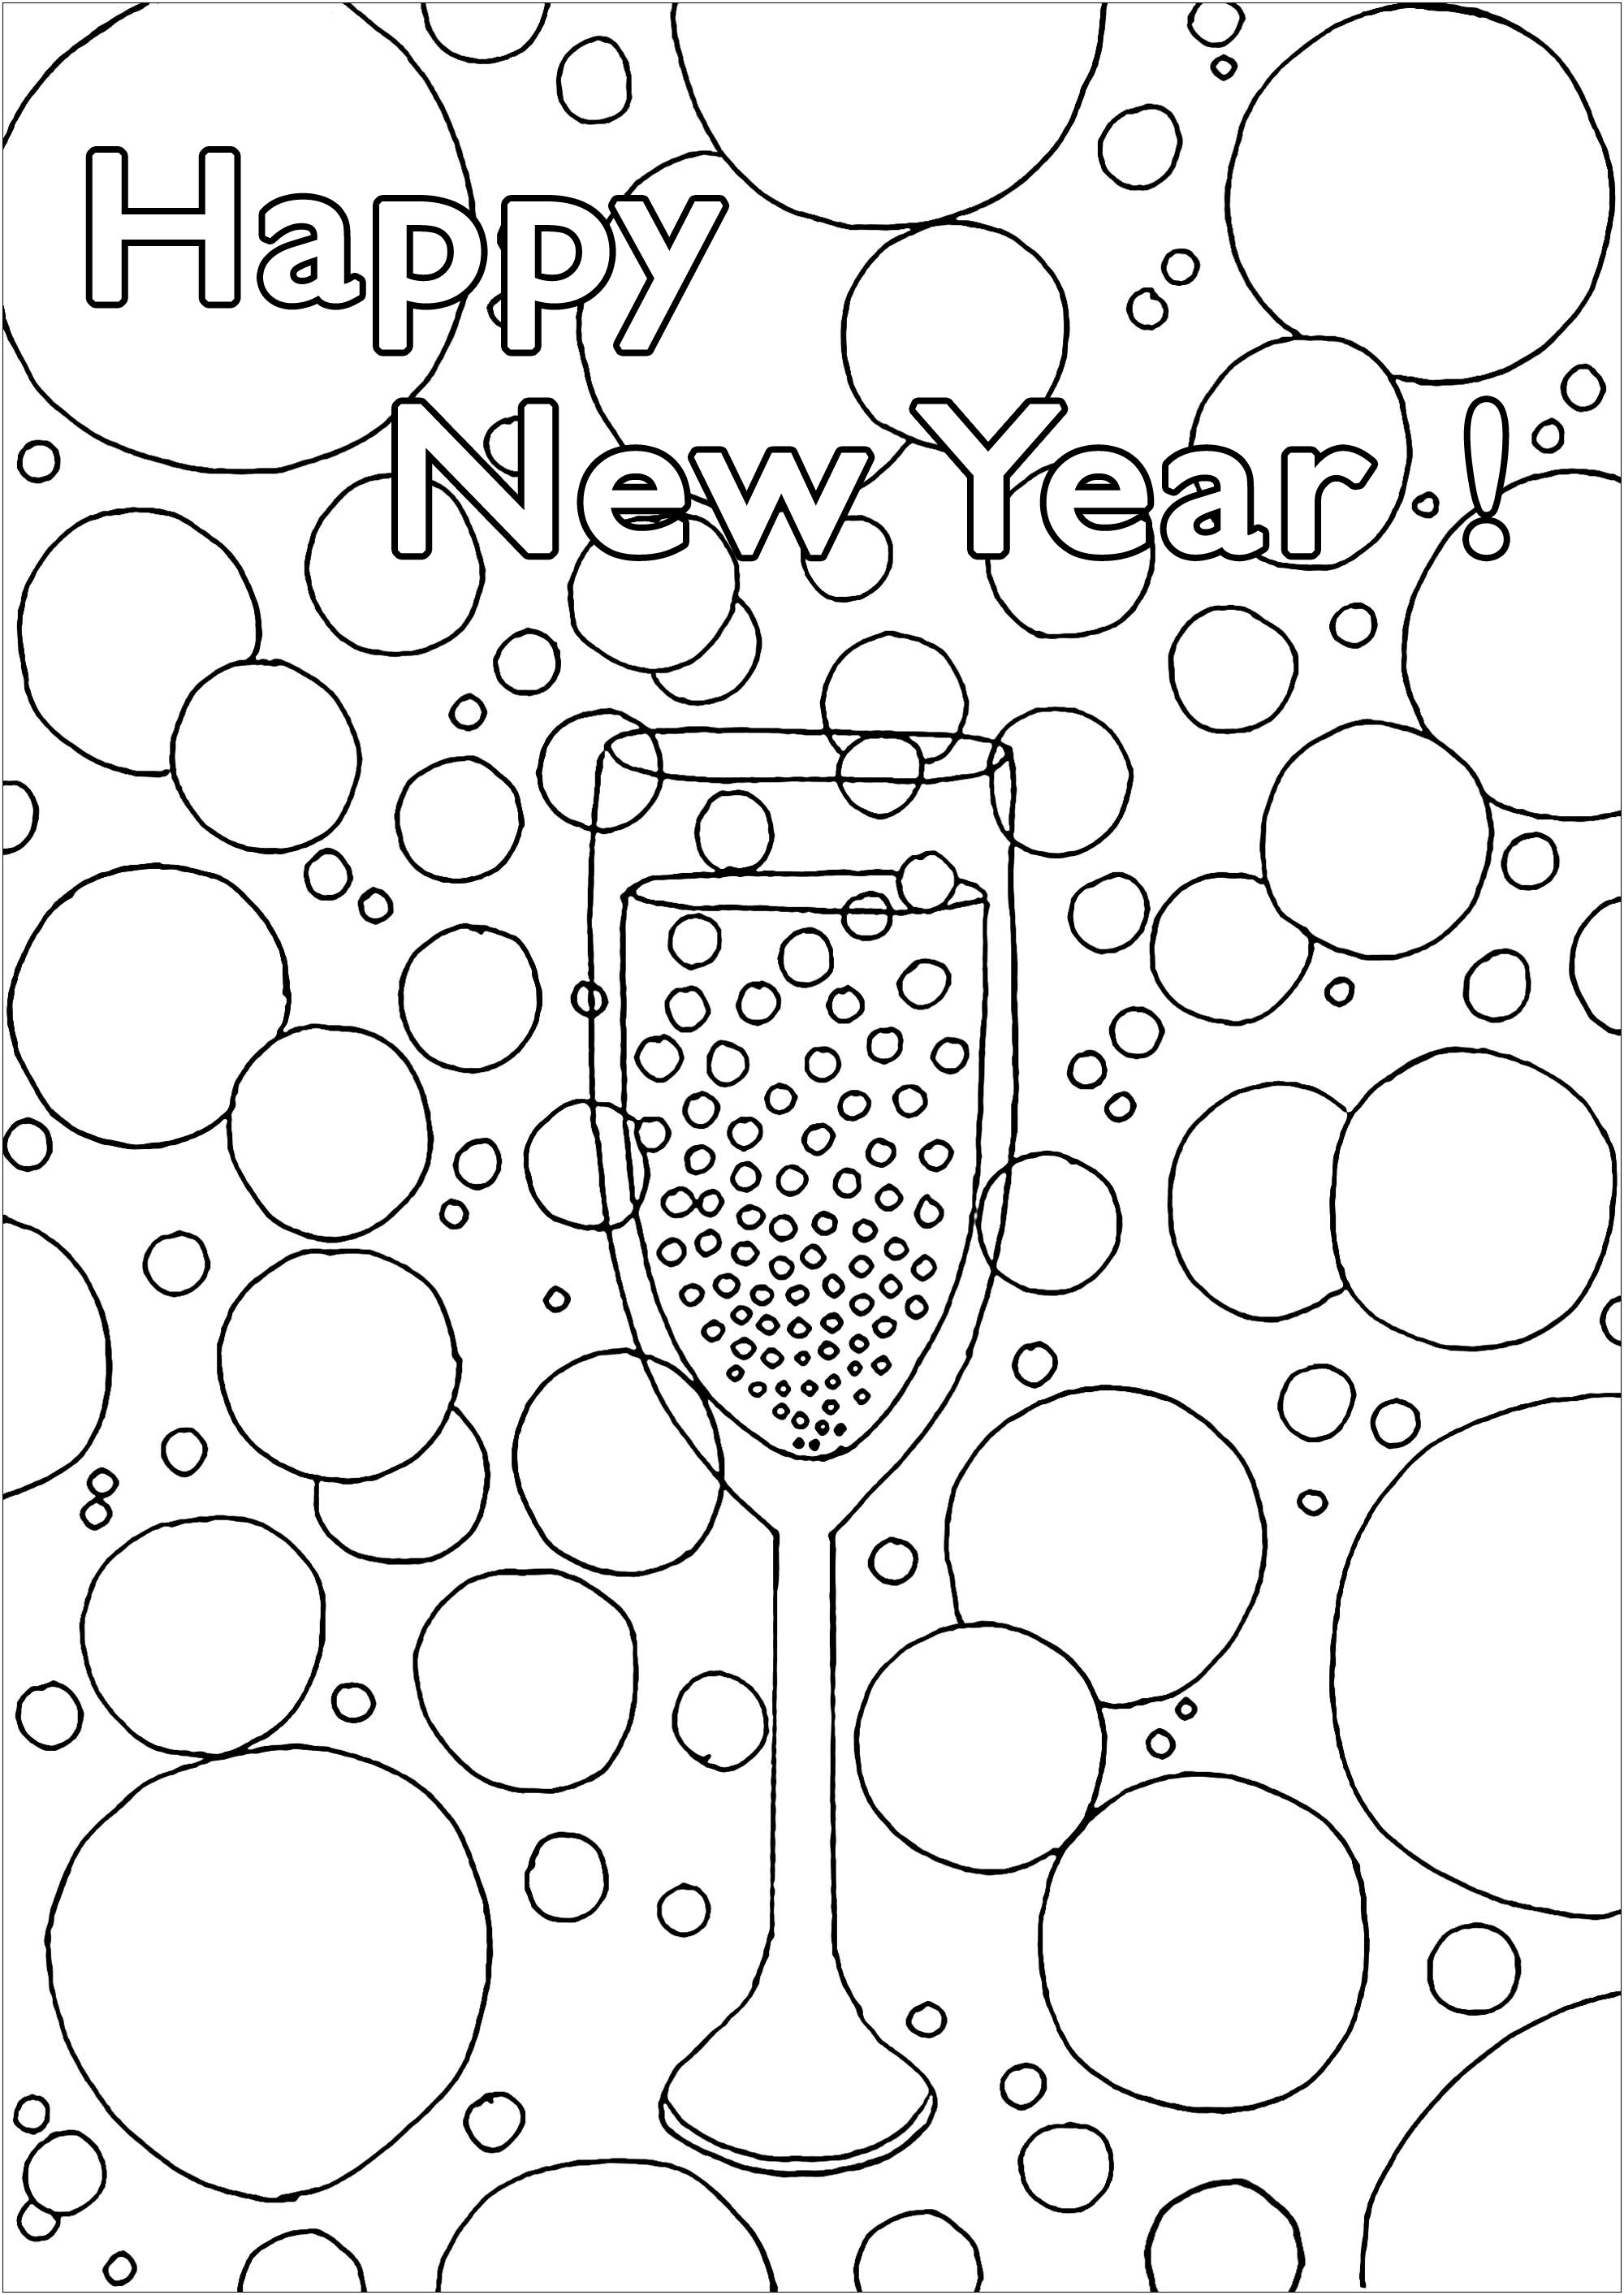 Champagne and Bubbles - Happy New year Adult Coloring Pages